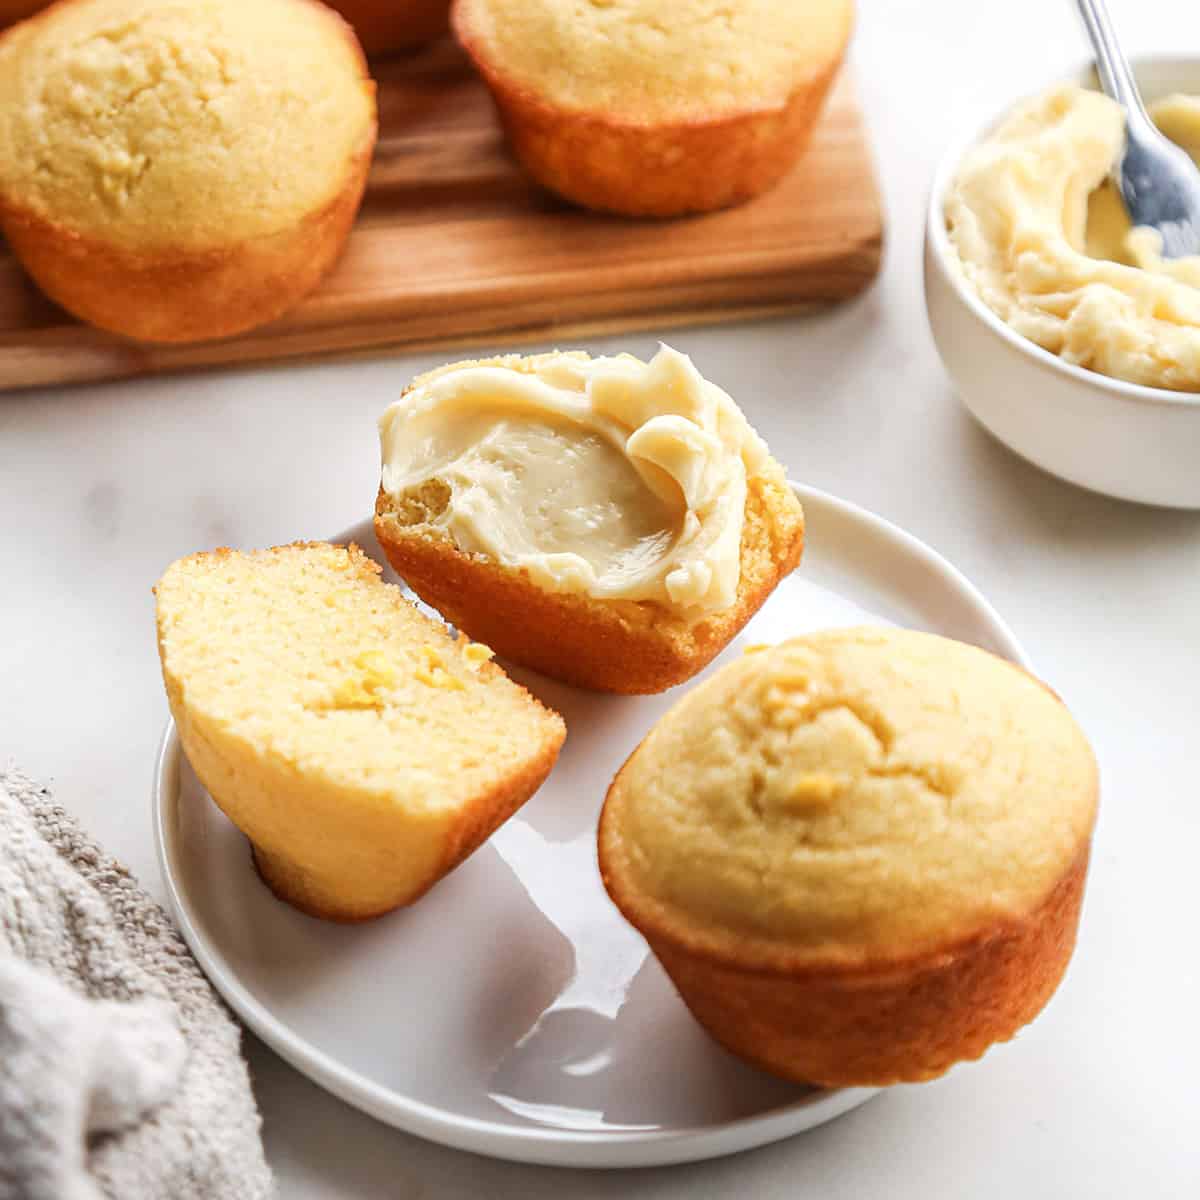 two Cornbread Muffins on a plate, one cut in half with butter spread on one half